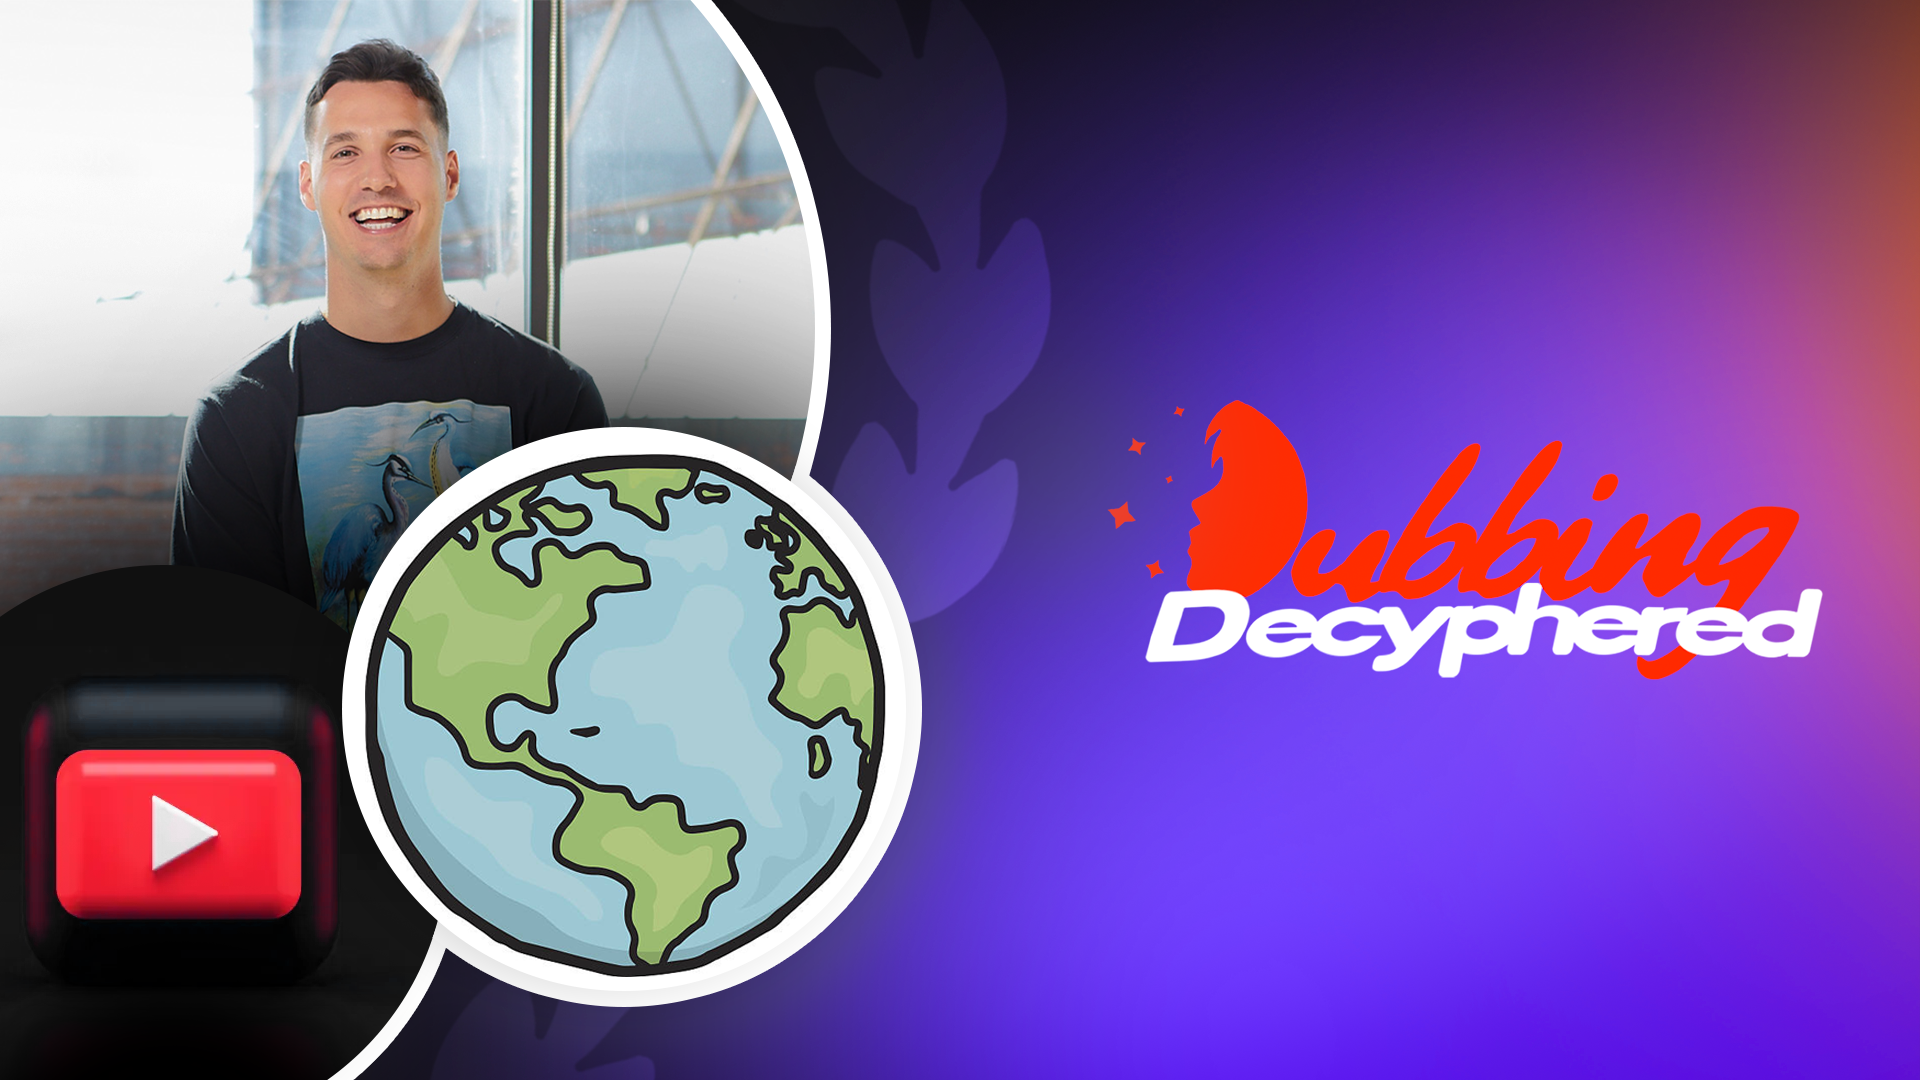 This week in Dubbing Decyphered, we spotlight Night Media’s Founder and CEO Reed Duchscher’s recent comments about Multi-Language Audio. Exploring his past advocacy and highlighting potential risks wh